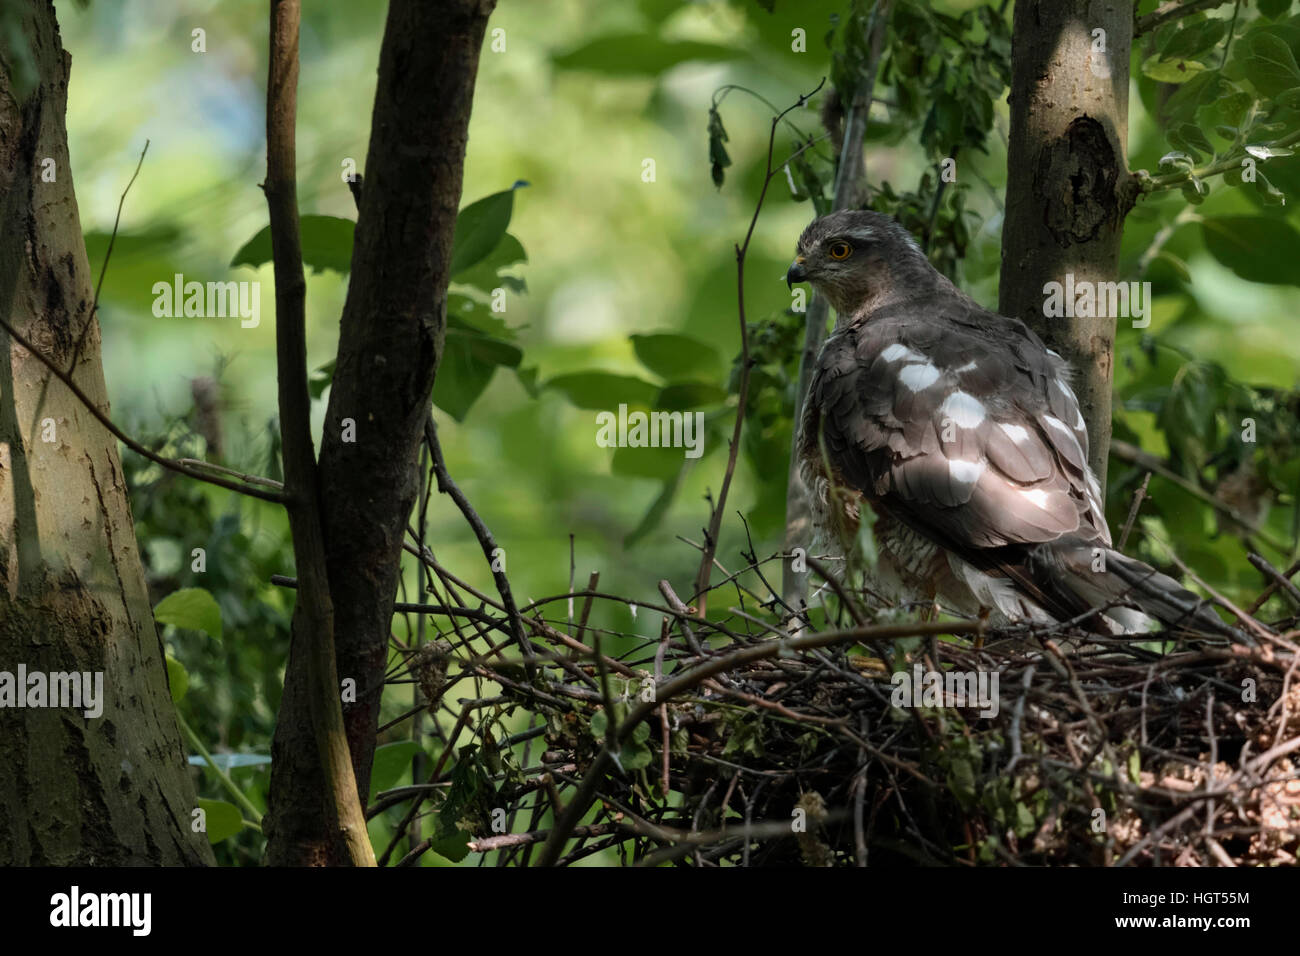 Sparrowhawk ( Accipiter nisus ), adult female, perched on the edge of its nest, watching around attentive, backside view. Stock Photo